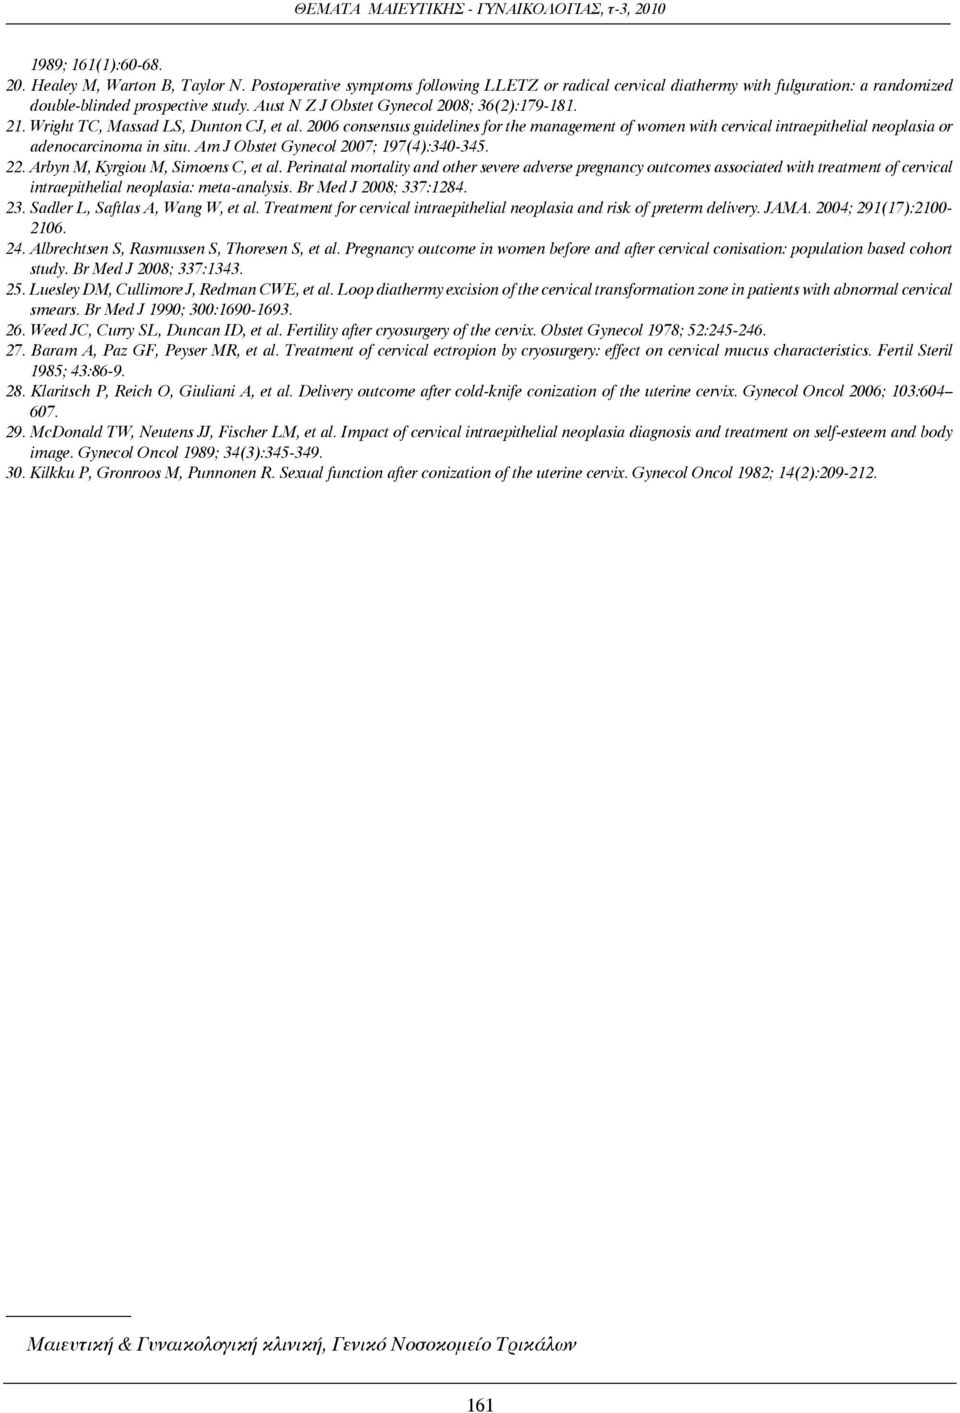 2006 consensus guidelines for the management of women with cervical intraepithelial neoplasia or adenocarcinoma in situ. Am J Obstet Gynecol 2007; 197(4):340-345. 22.